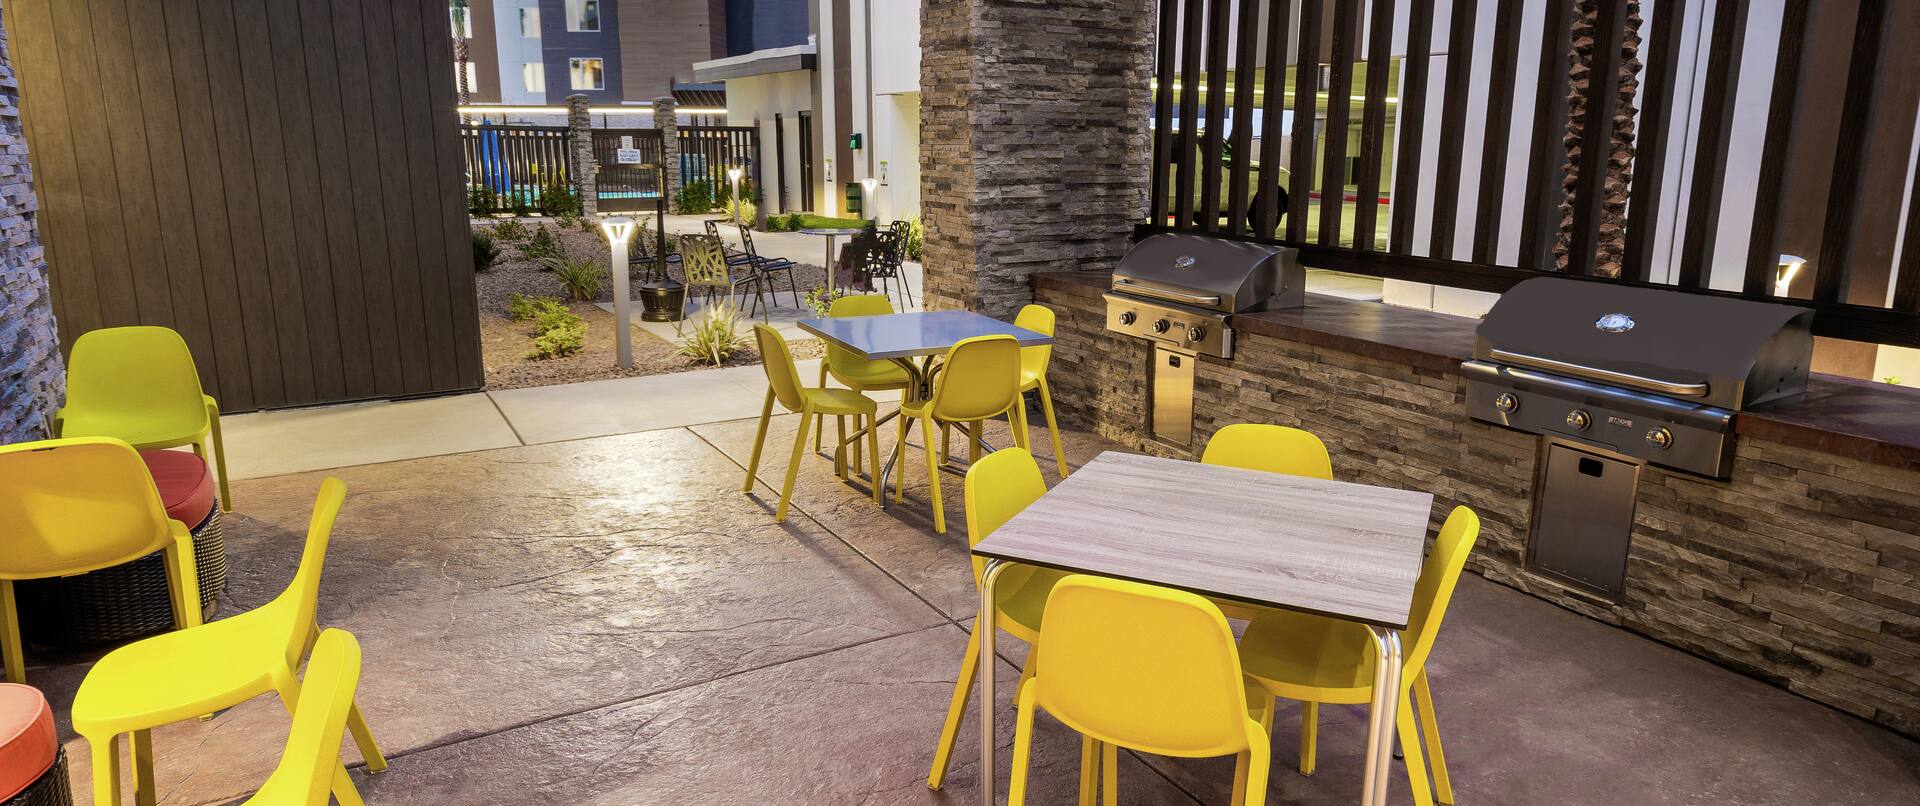 Outdoor Patio Tables and Grills